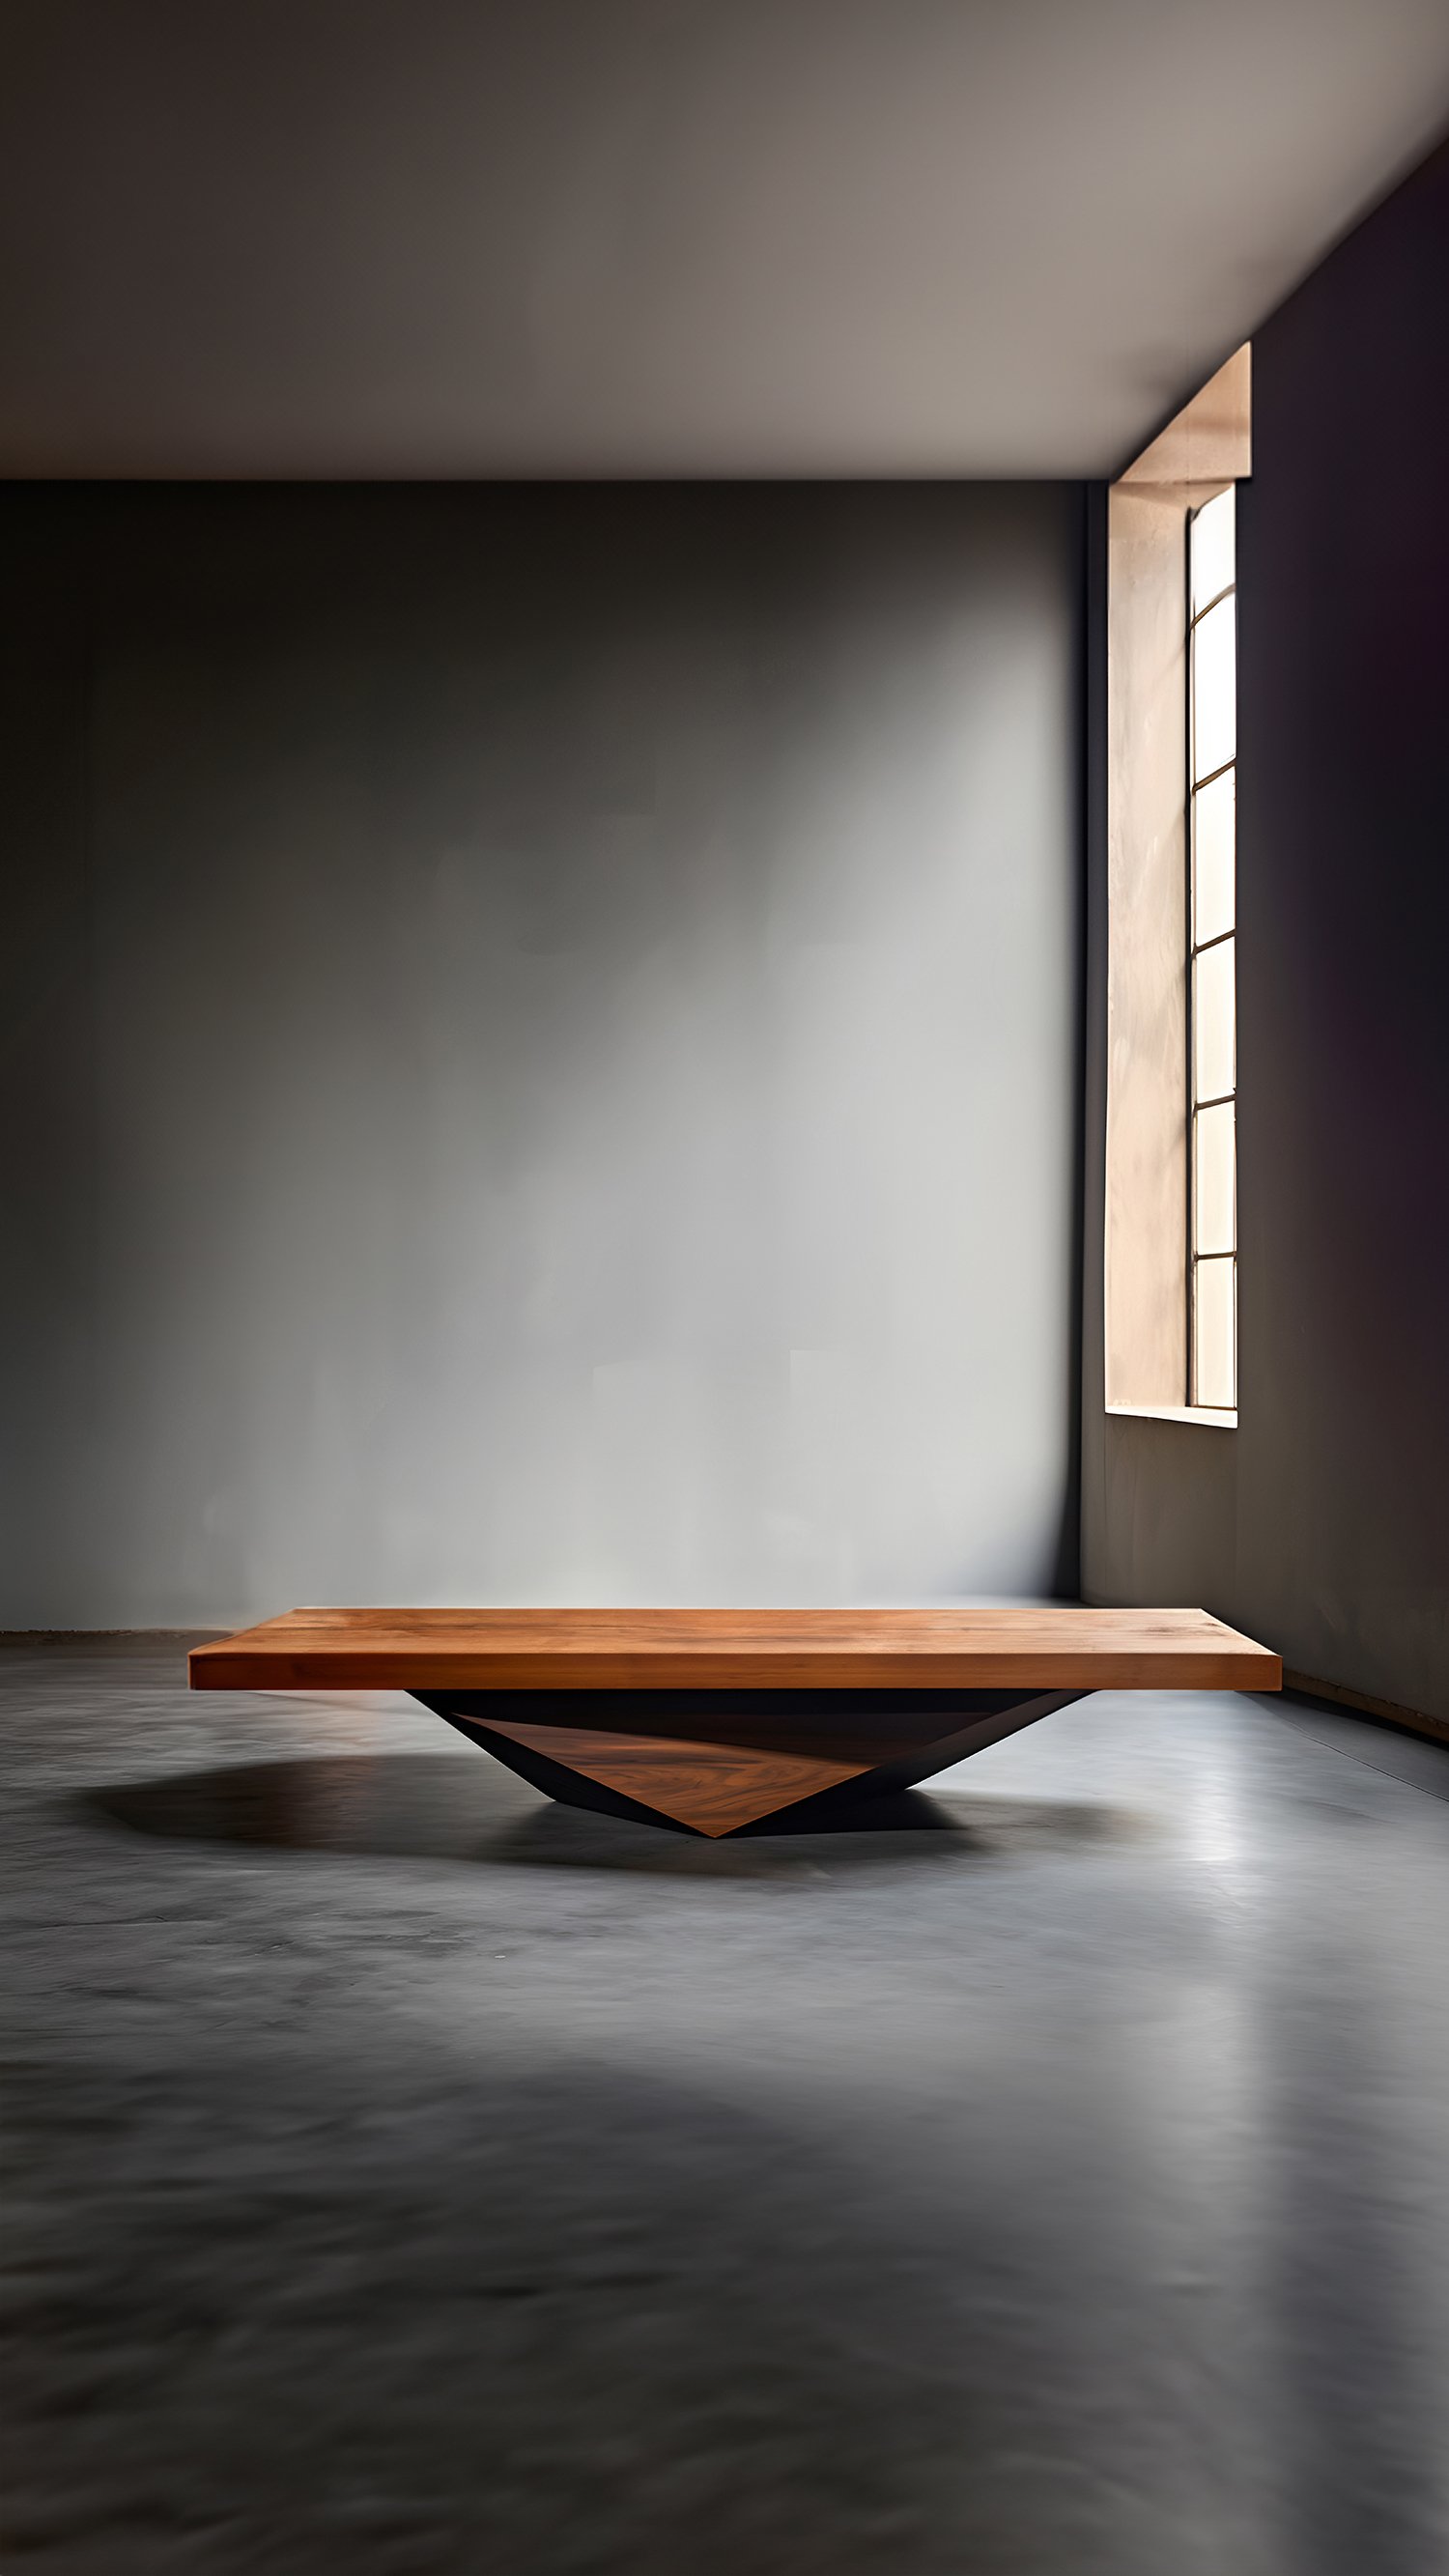 Rectangular Coffee Table Made of Solid Wood, Center Table Solace S23 by Joel Escalona — 7.jpg